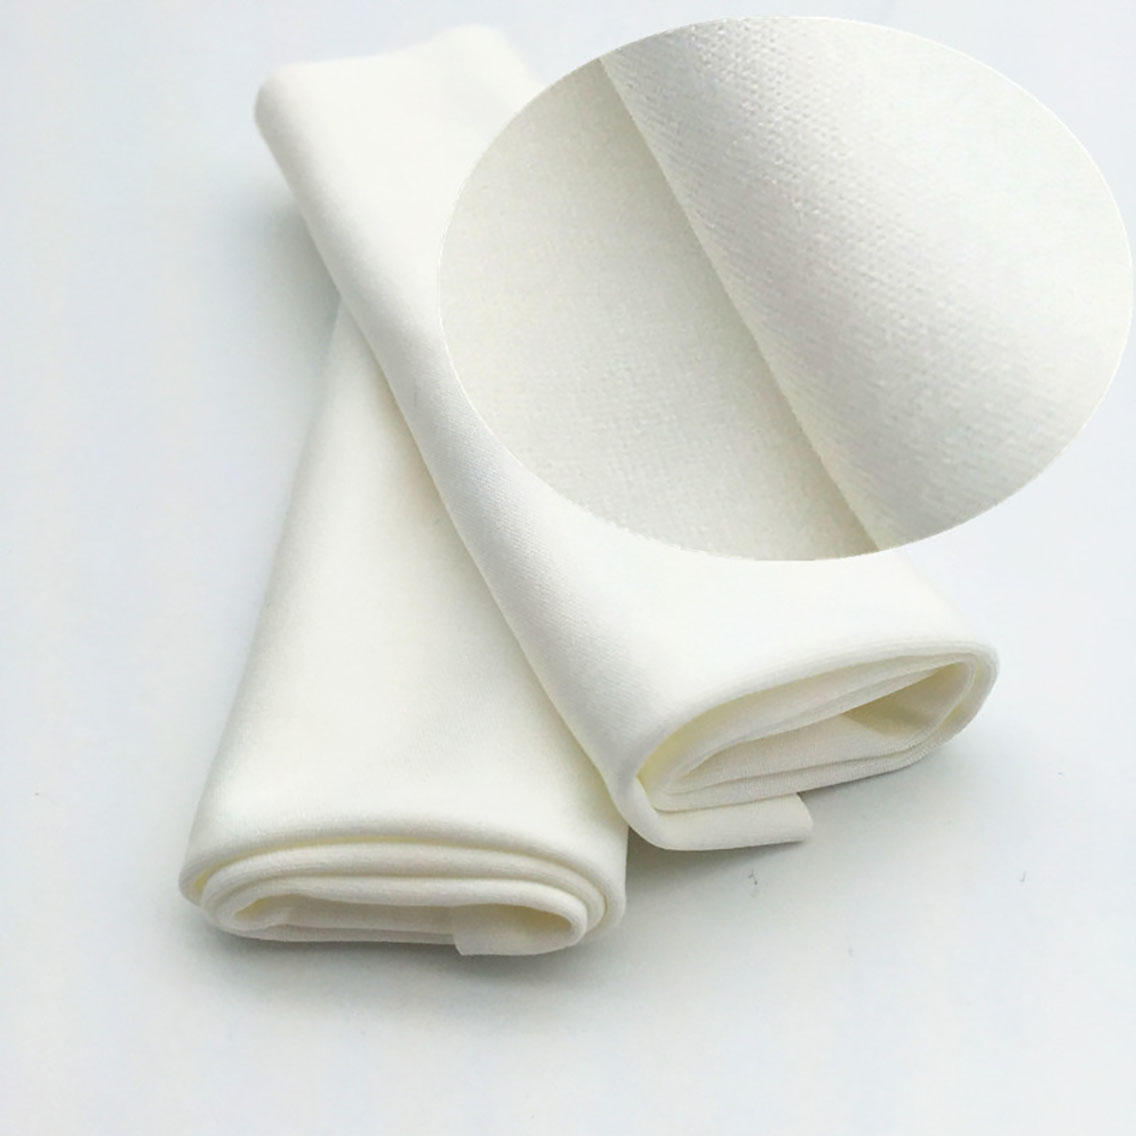 Cleanmo convenient lens cloth supplier for medical device products